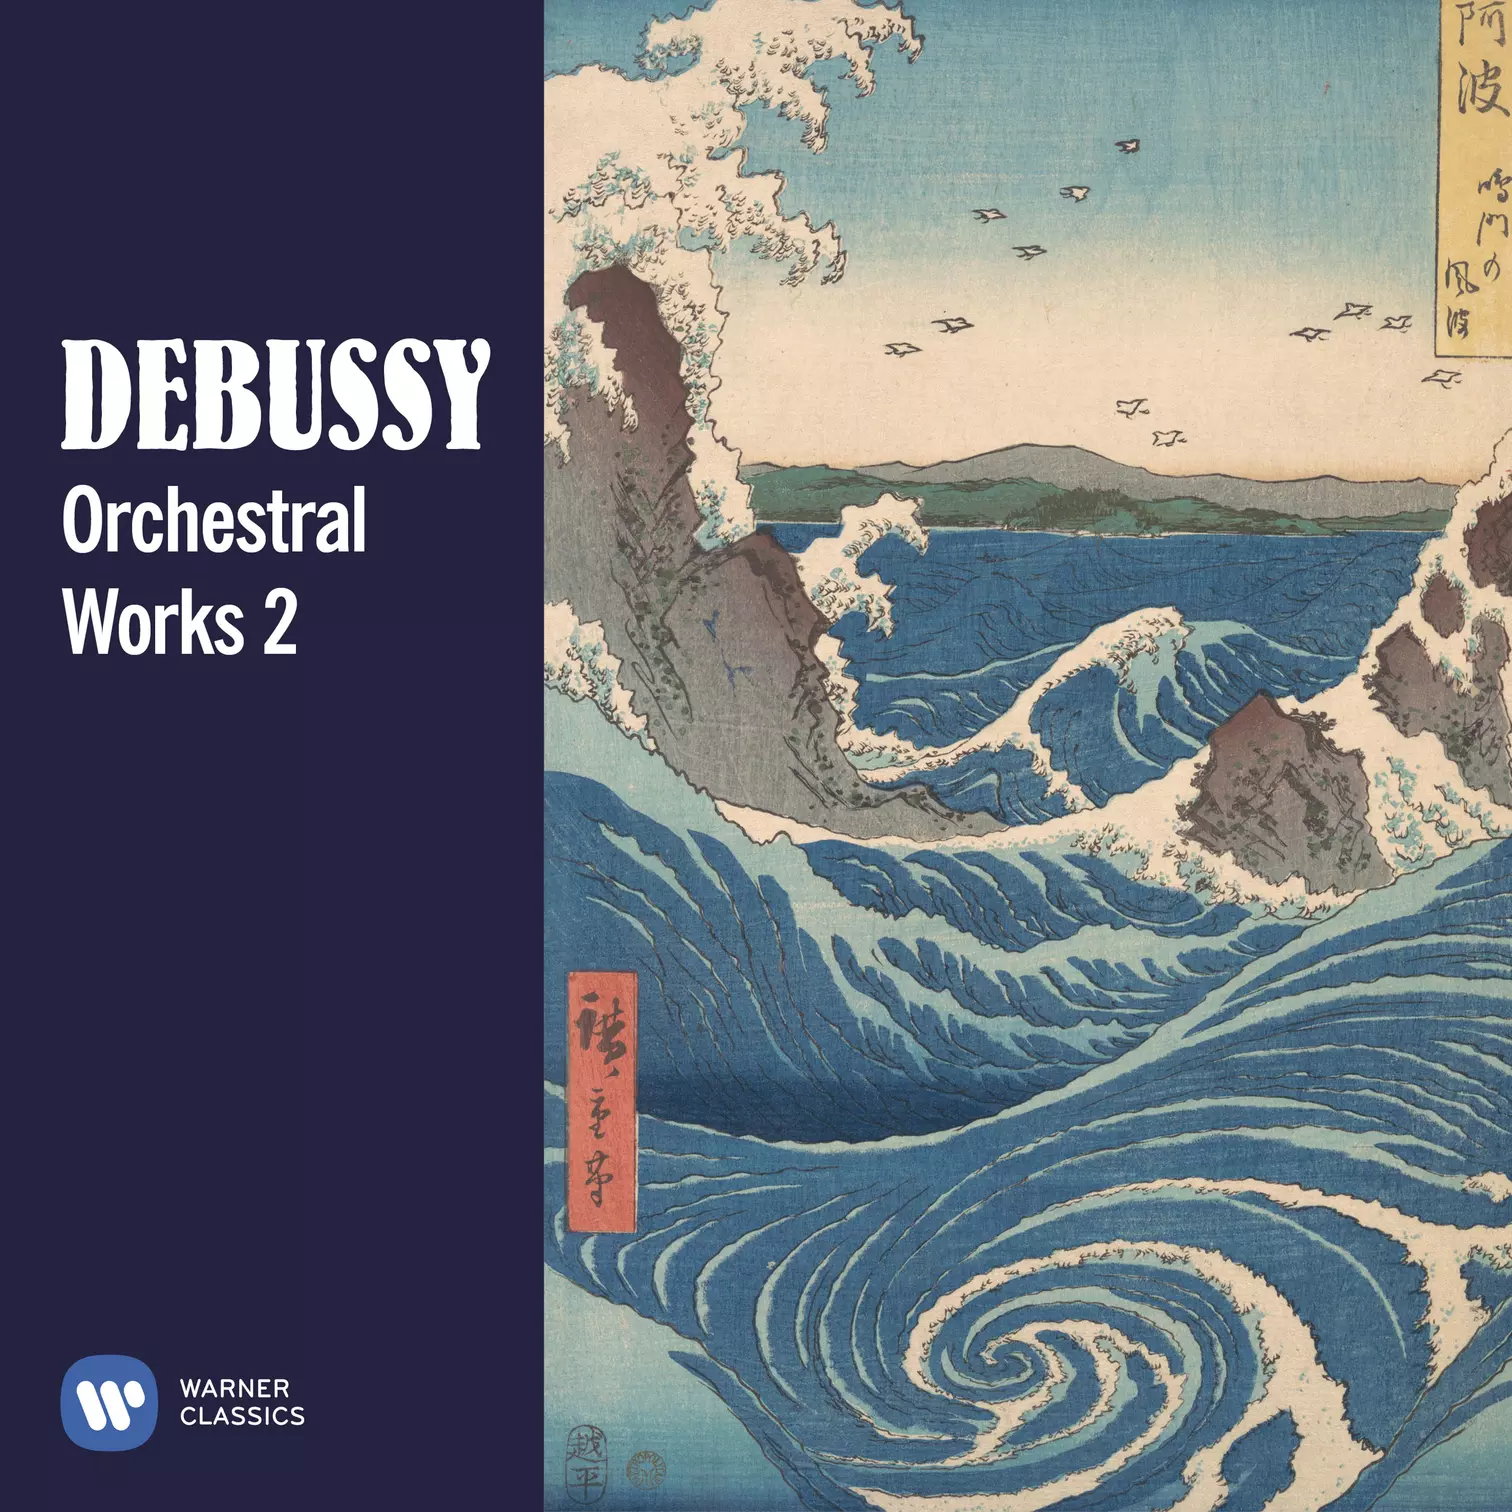 Debussy: Orchestral Works 2